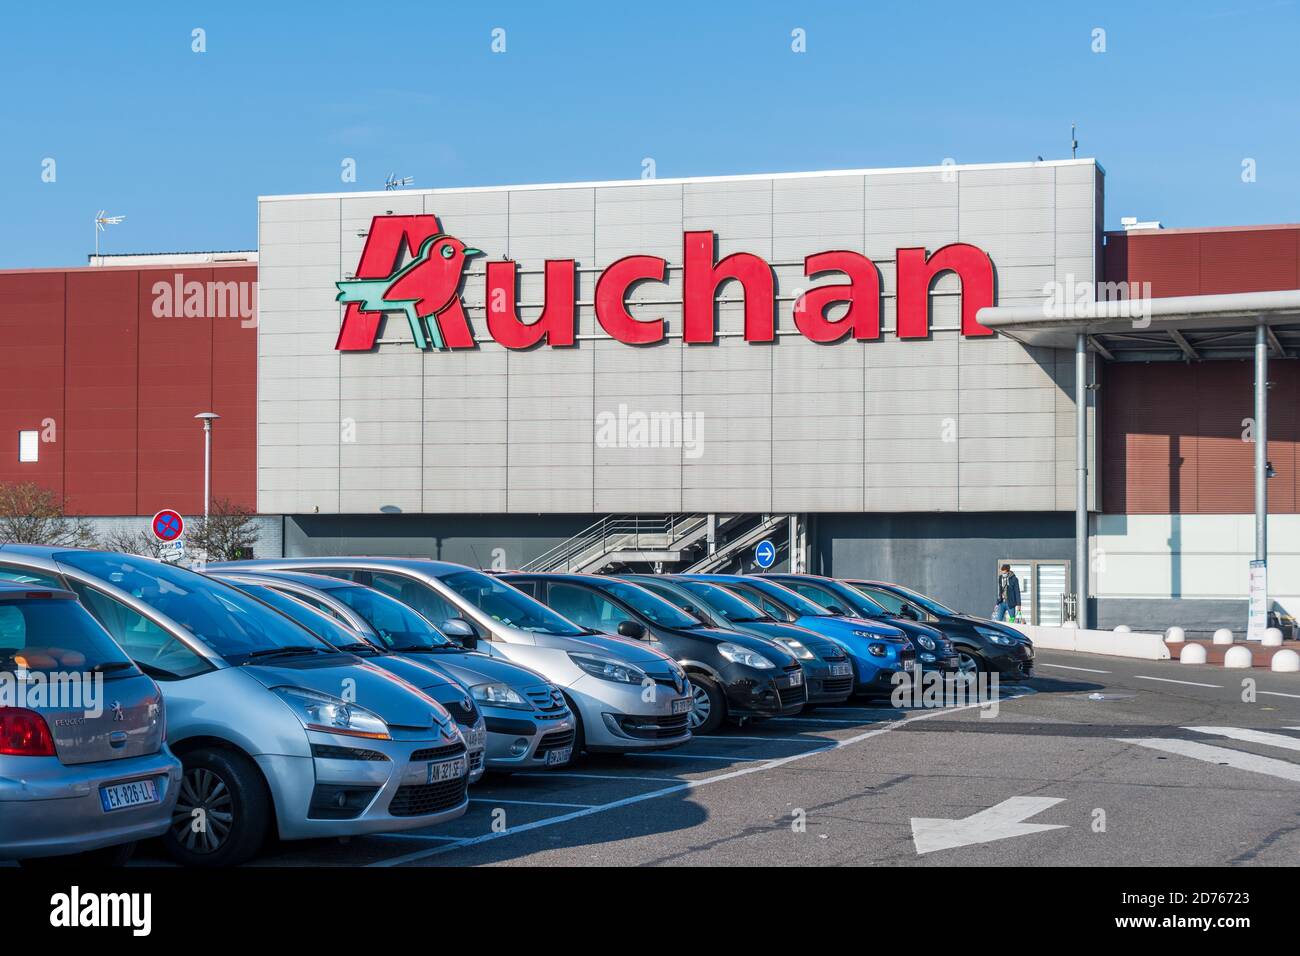 Exterior view of the largest Auchan hypermarket in France, in the Westfield Vélizy 2 shopping center. Auchan is a French multinational retail group Stock Photo